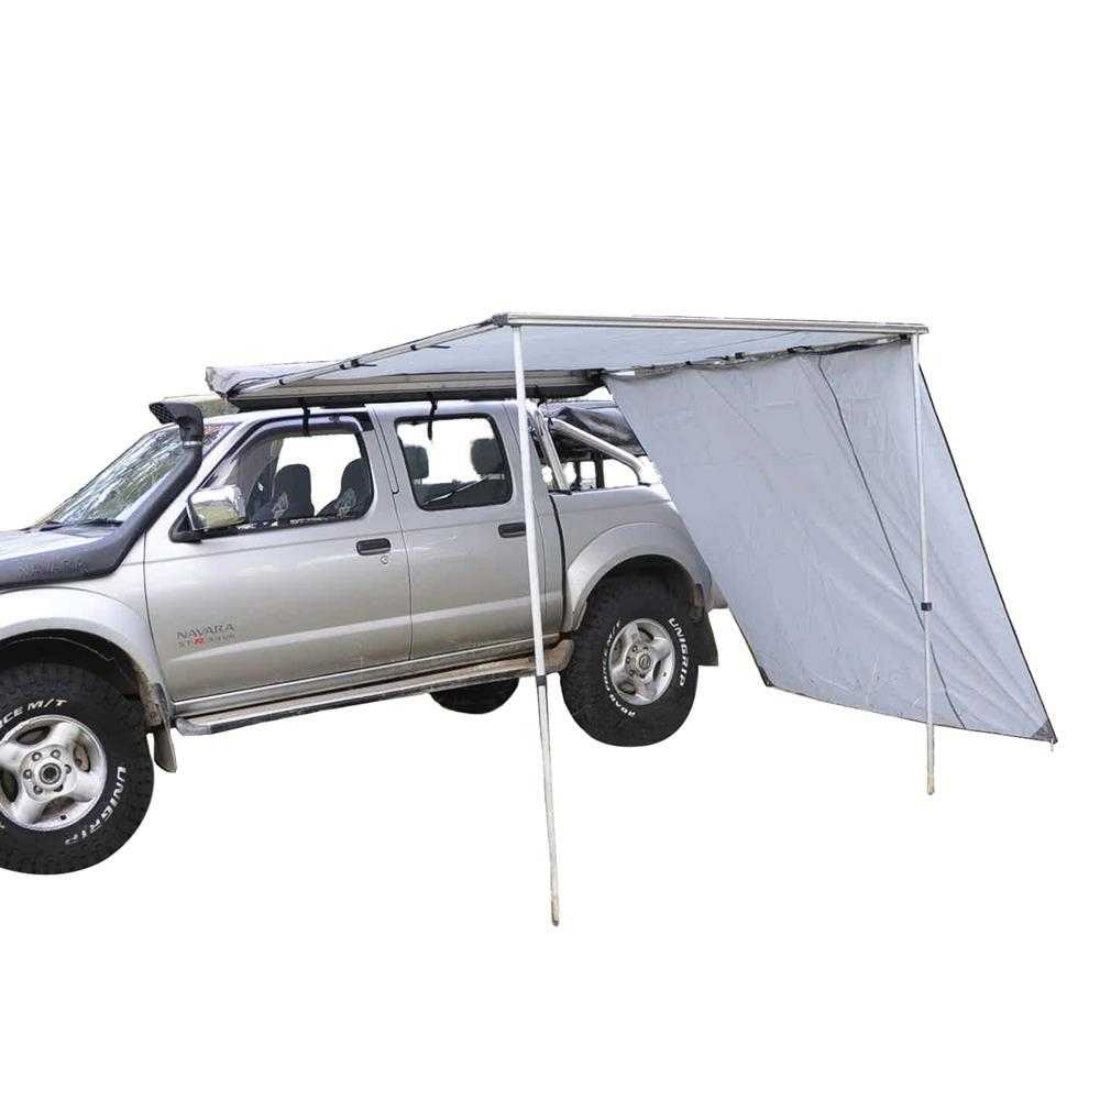 2.5 X 2m Over Sill Awning Operator Extension 4wd Camping